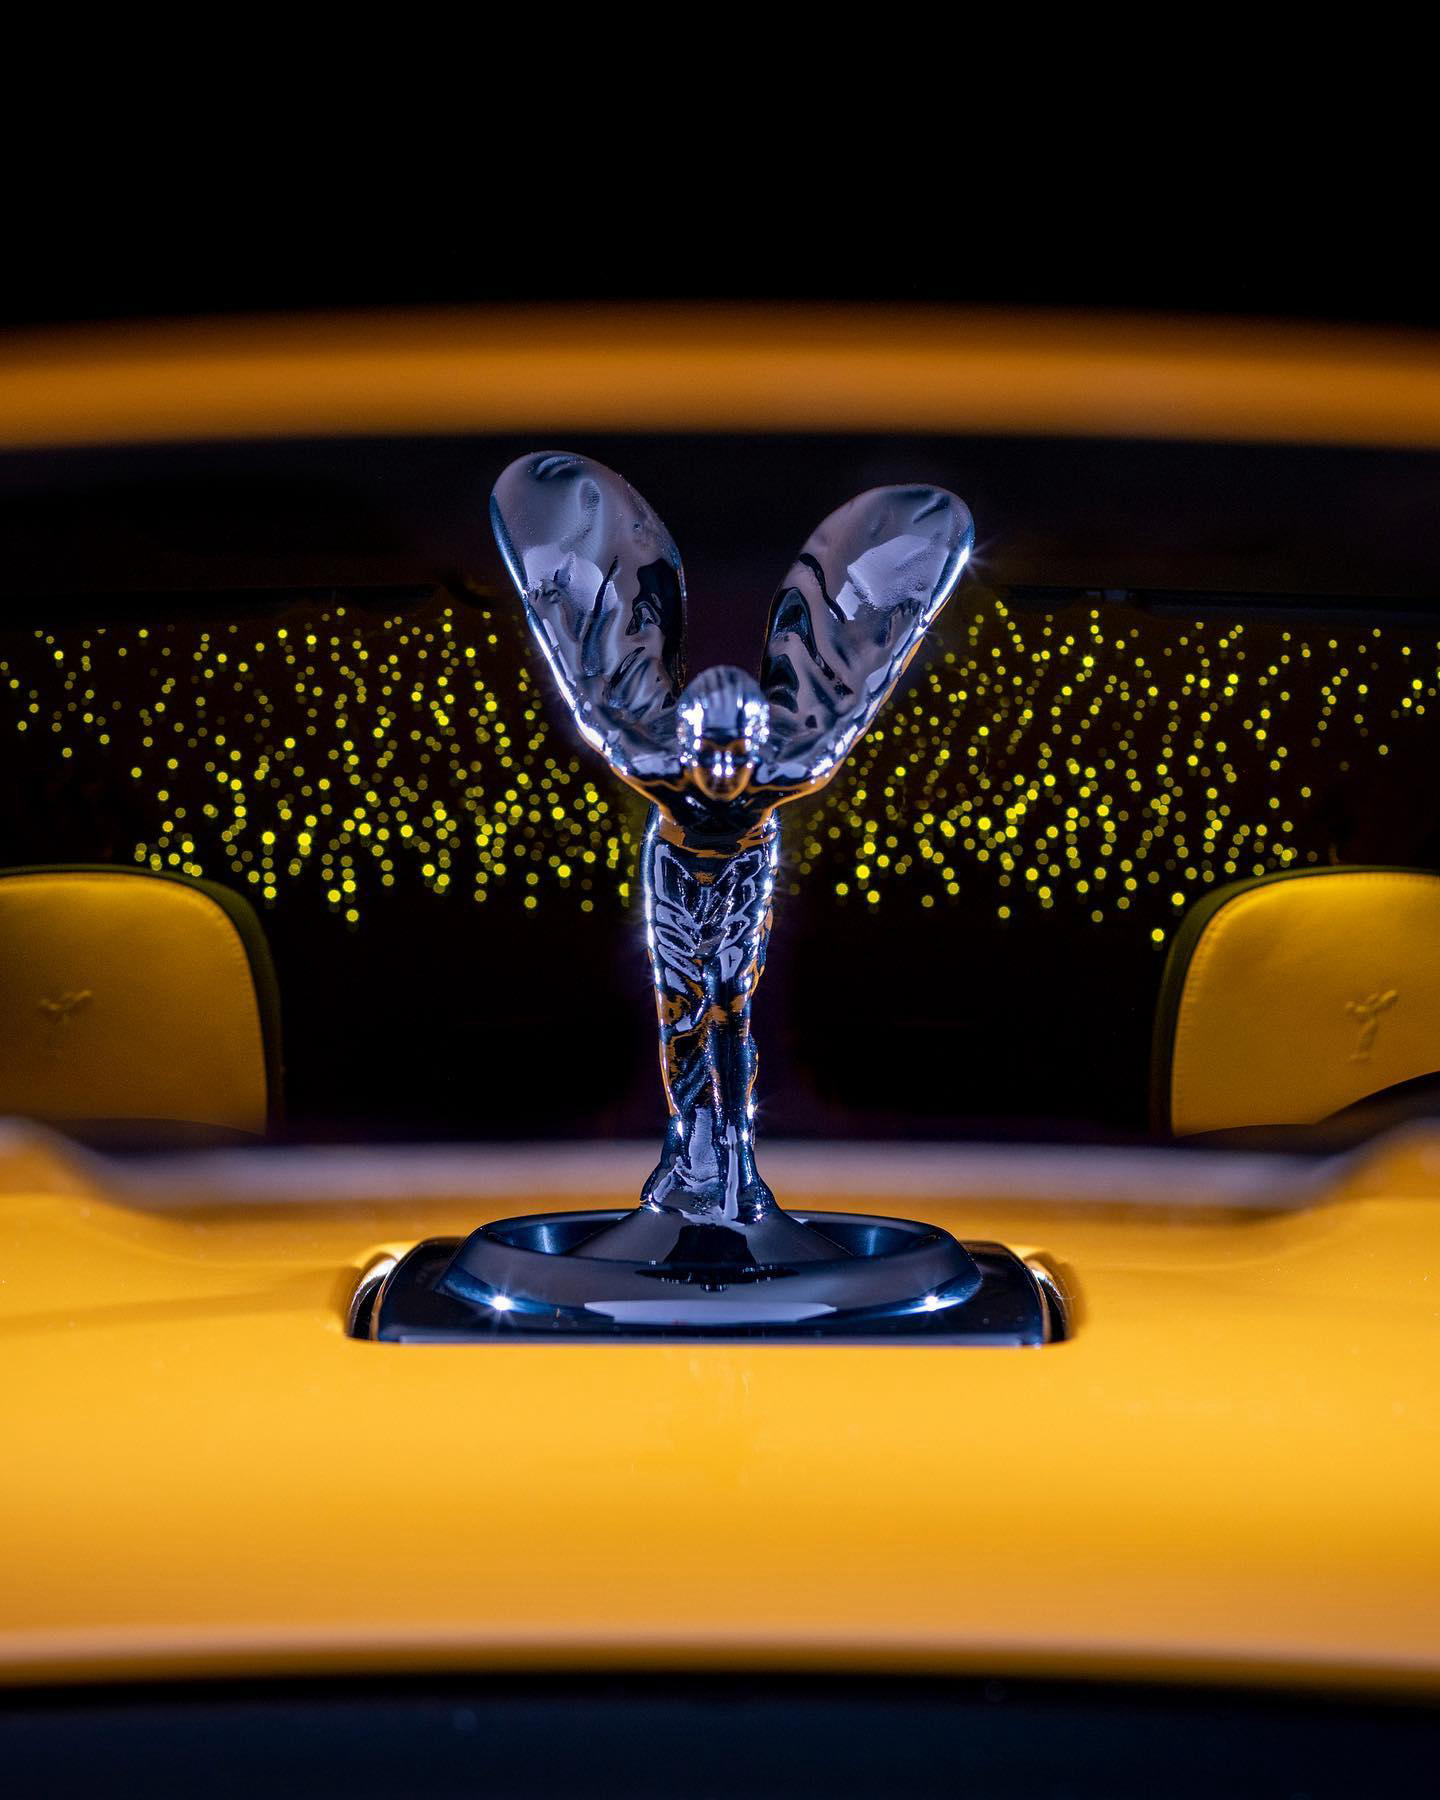 Rolls-Royce Motor Cars - A sparkling muse and stellar adornment, the #SpiritofEcstasy ushers in the